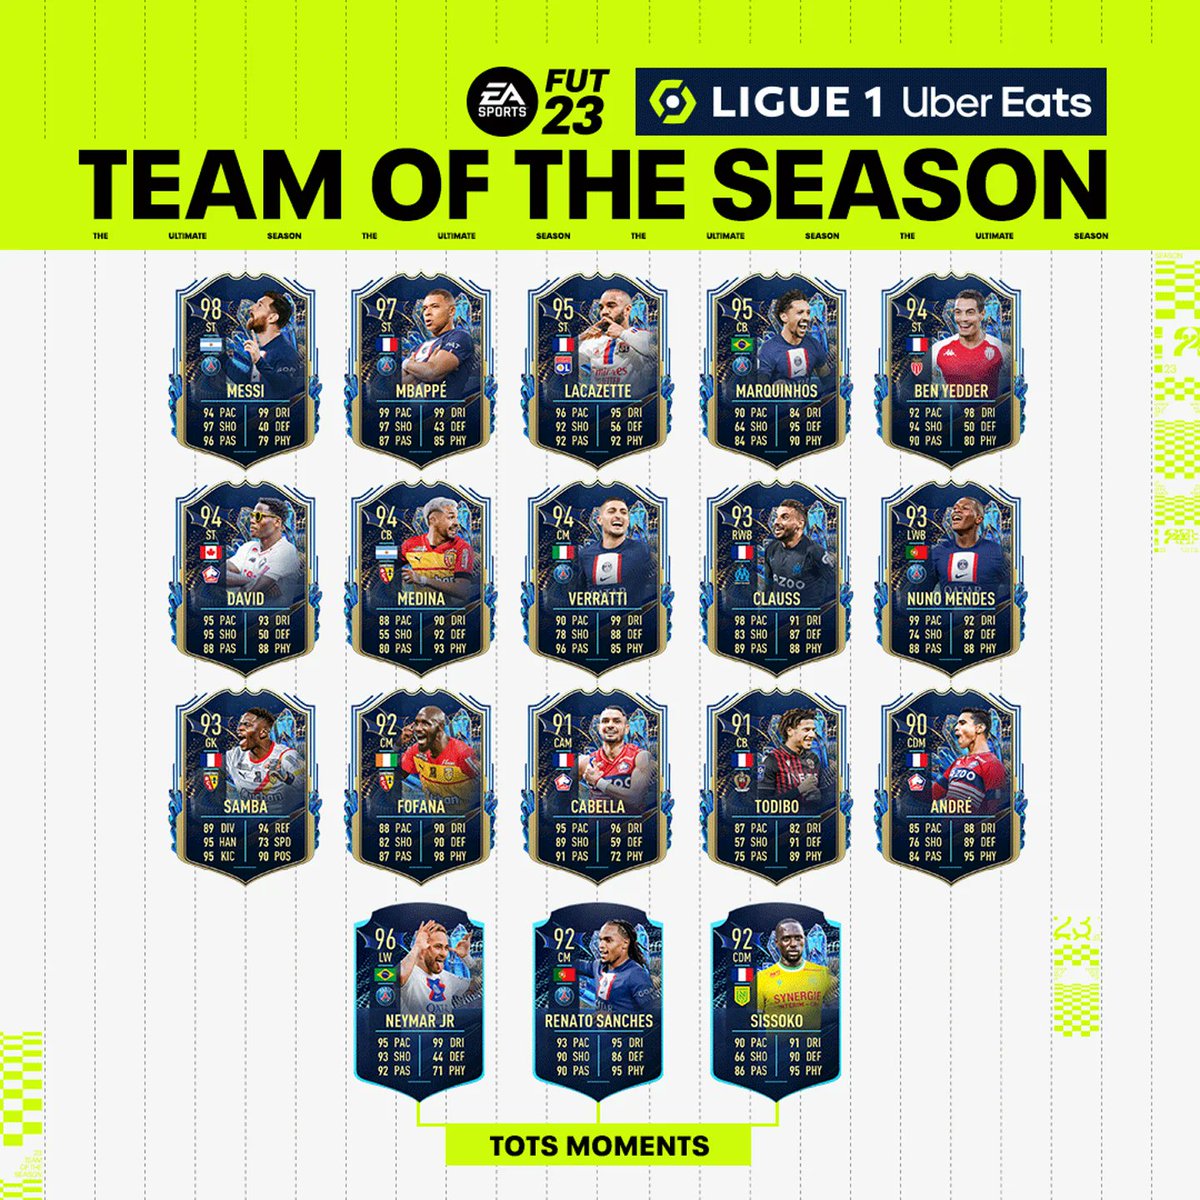 Mbappe, Messi and Neymar 👍 Marquinhos, David and Ben Yedder look amazing too. Have you packed any of the Ligue 1 TOTS yet? Have you unlocked Traore, Kimpembe, Mbemba or Openda yet? Full squad -futhead.com/23/totw/ligue1…